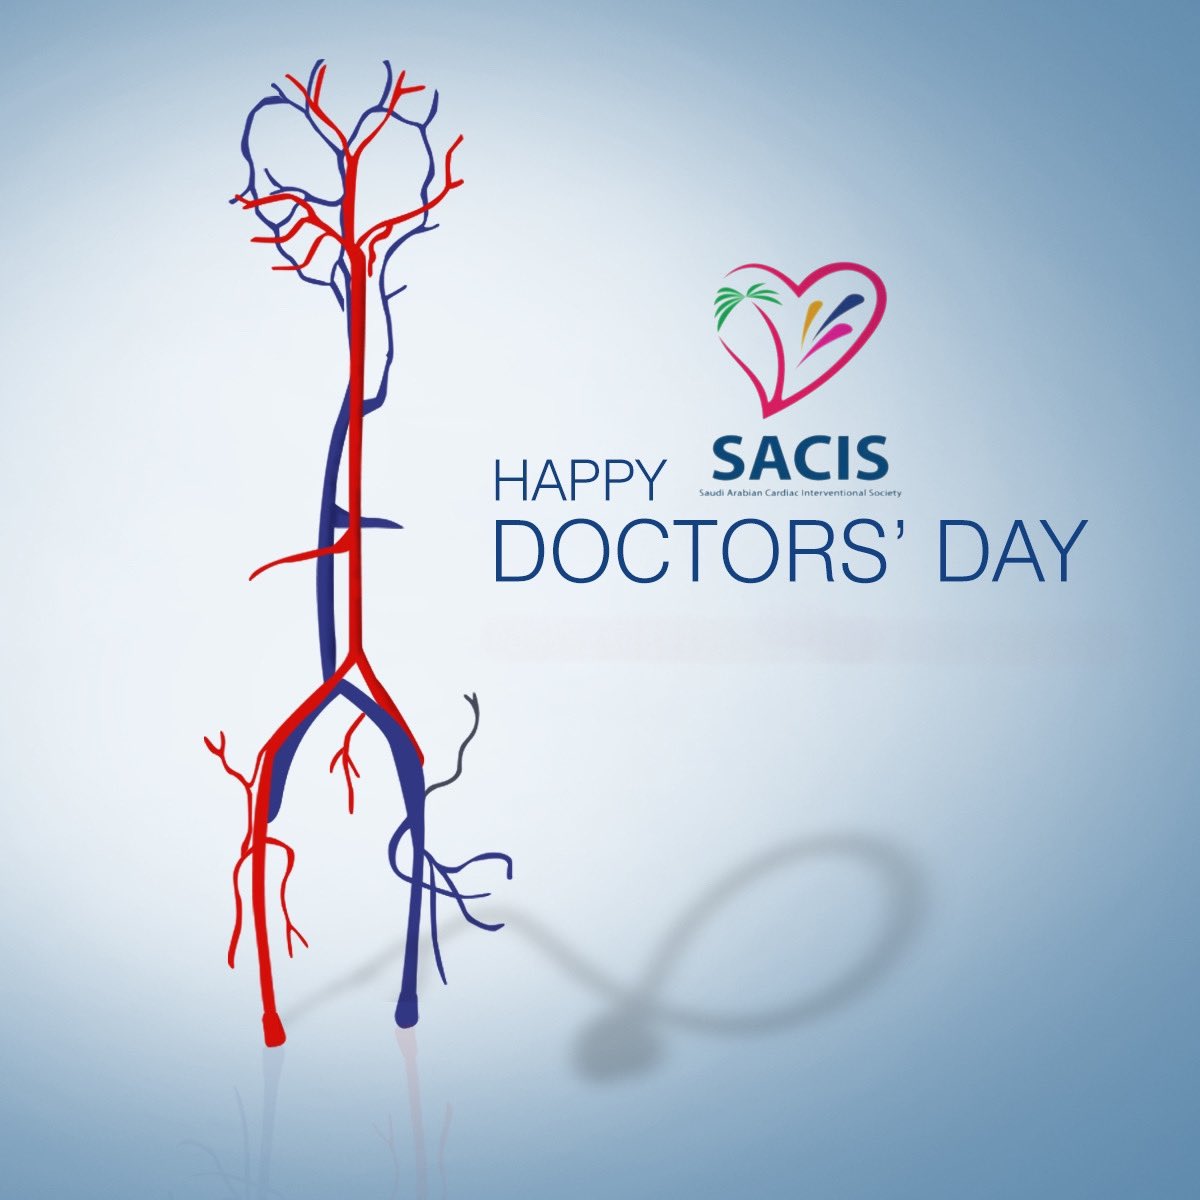 As we celebrate #DoctorsDay SACIS extends its gratitude to all #cardiologists and healthcare team members who save lives & limbs everyday Your commitment is driving the field and we thank you for all you do! 🩺#InterventionalCardiology